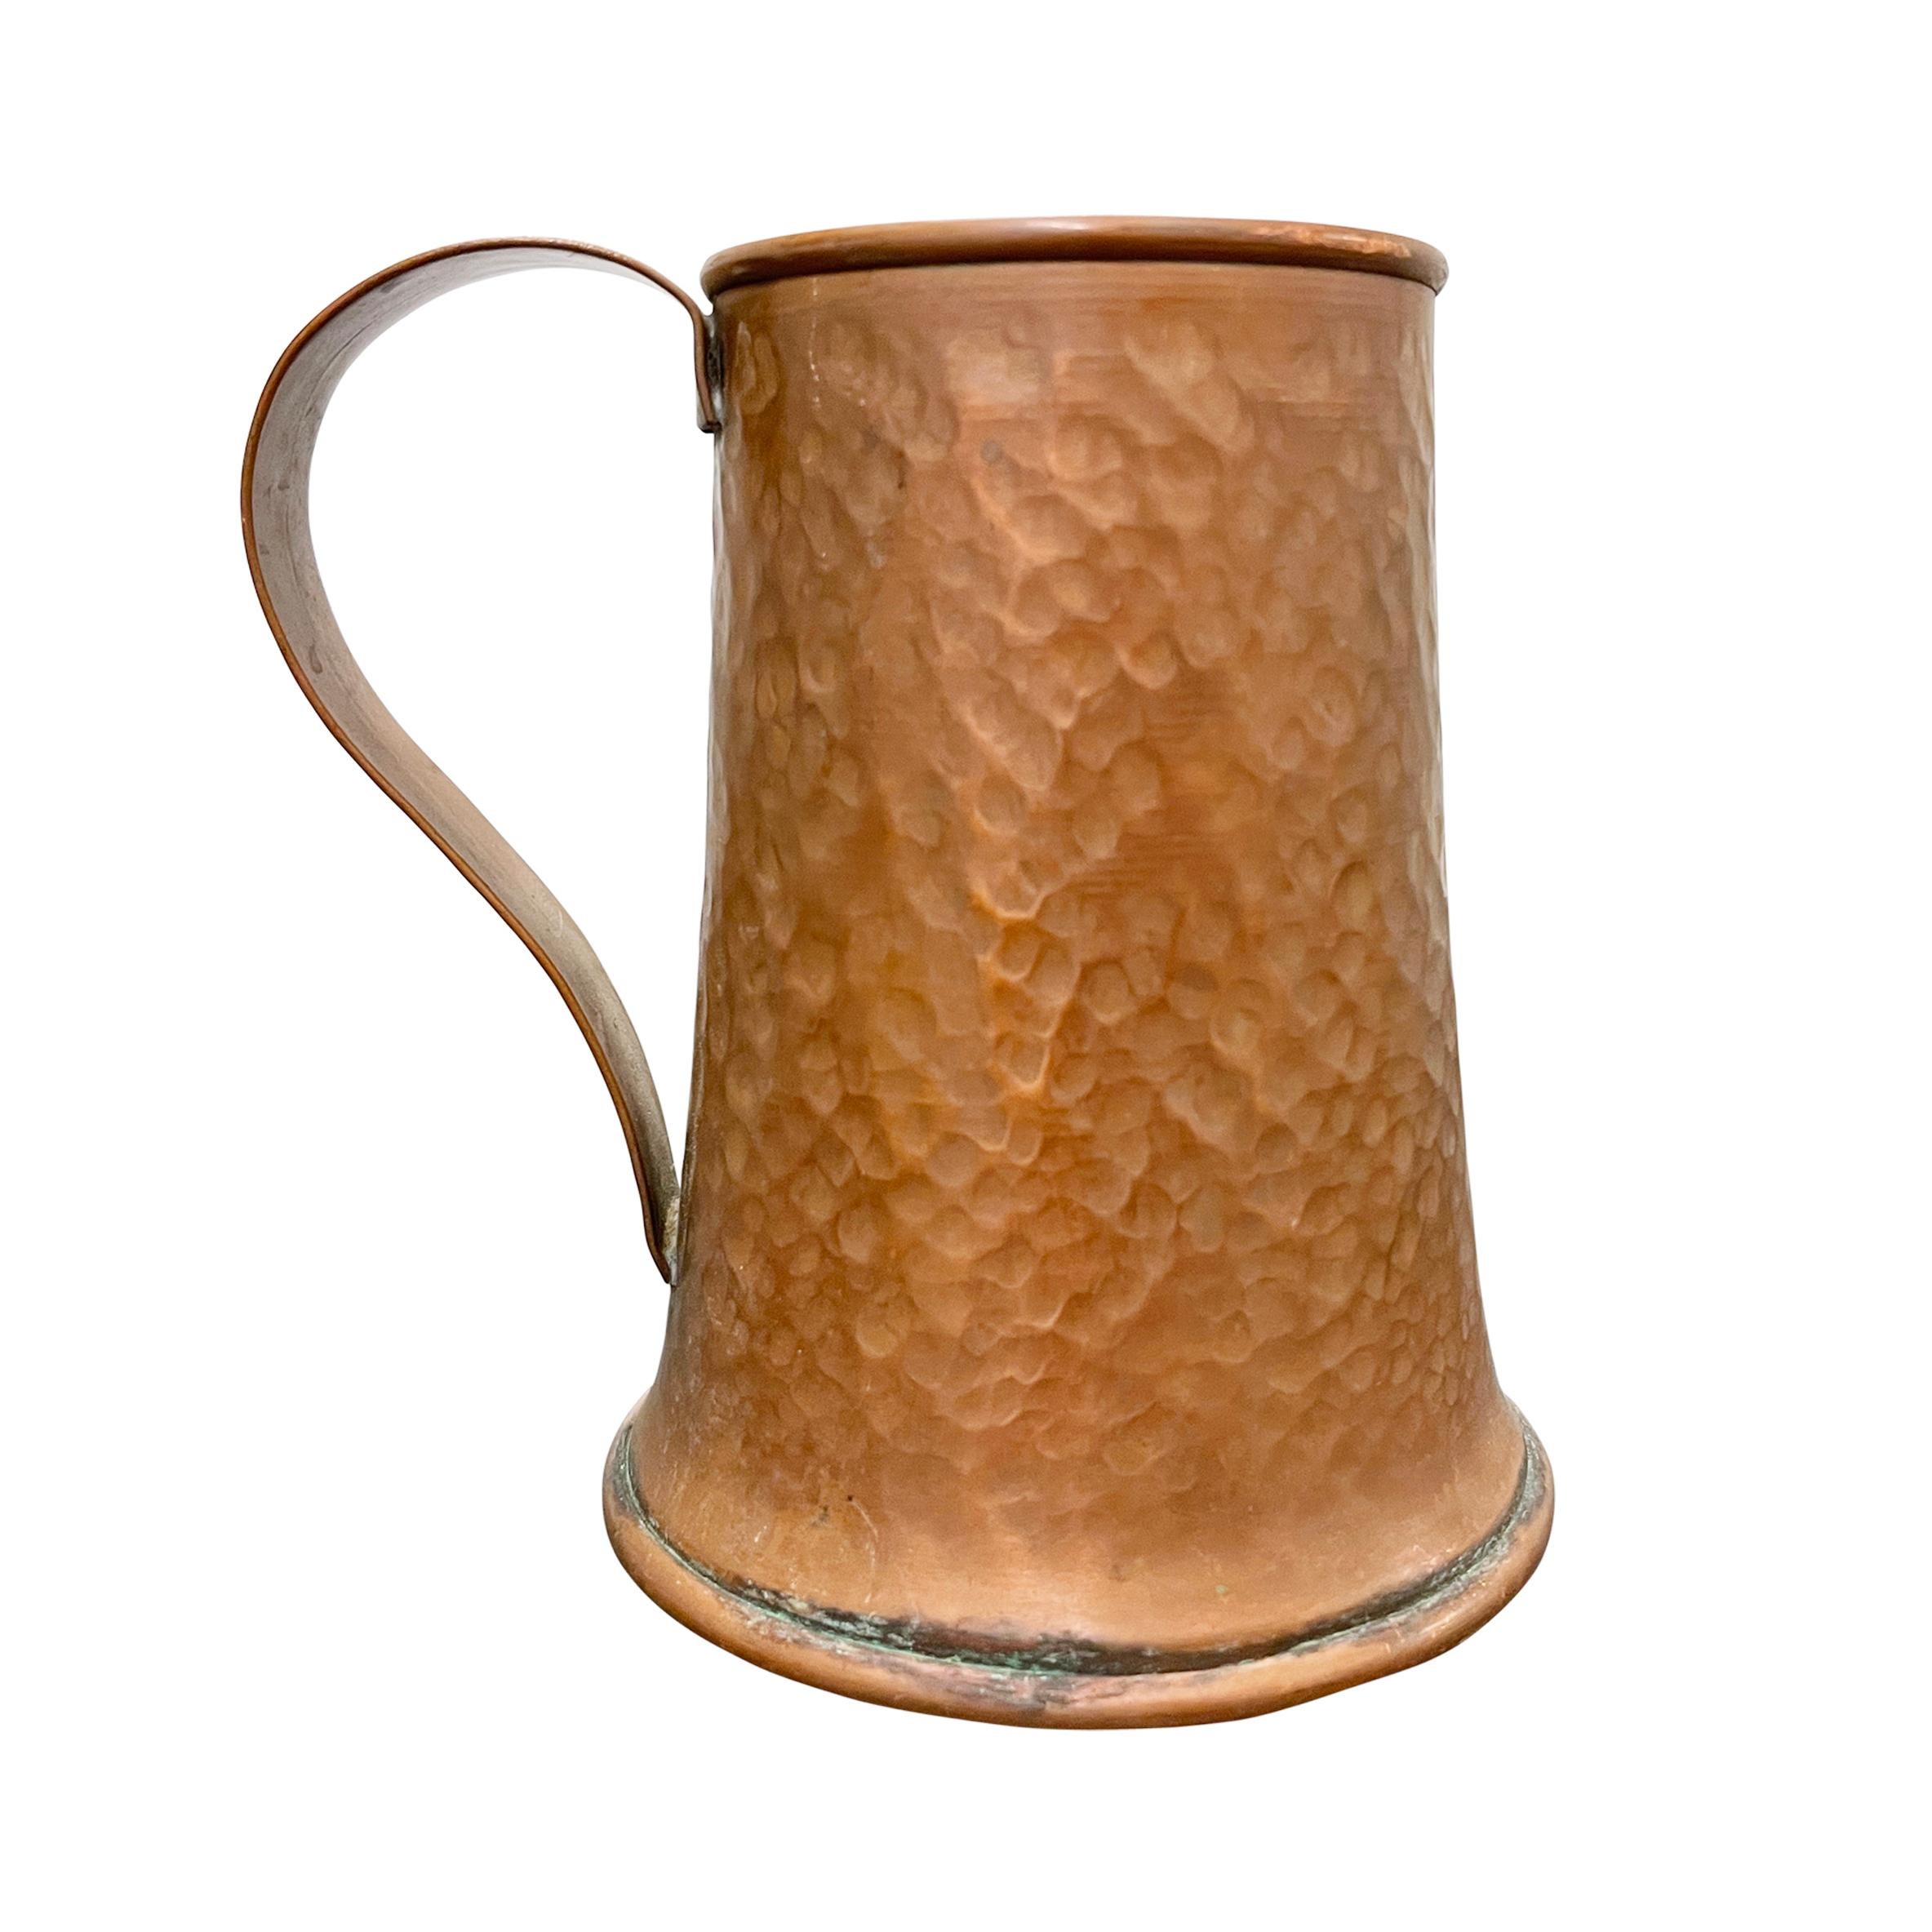 A wonderful set of six hand-hammered copper beer tankards waiting for your next cocktail concoction, or perfect for spreading down the center of your dining table and filling with flowers or candles.